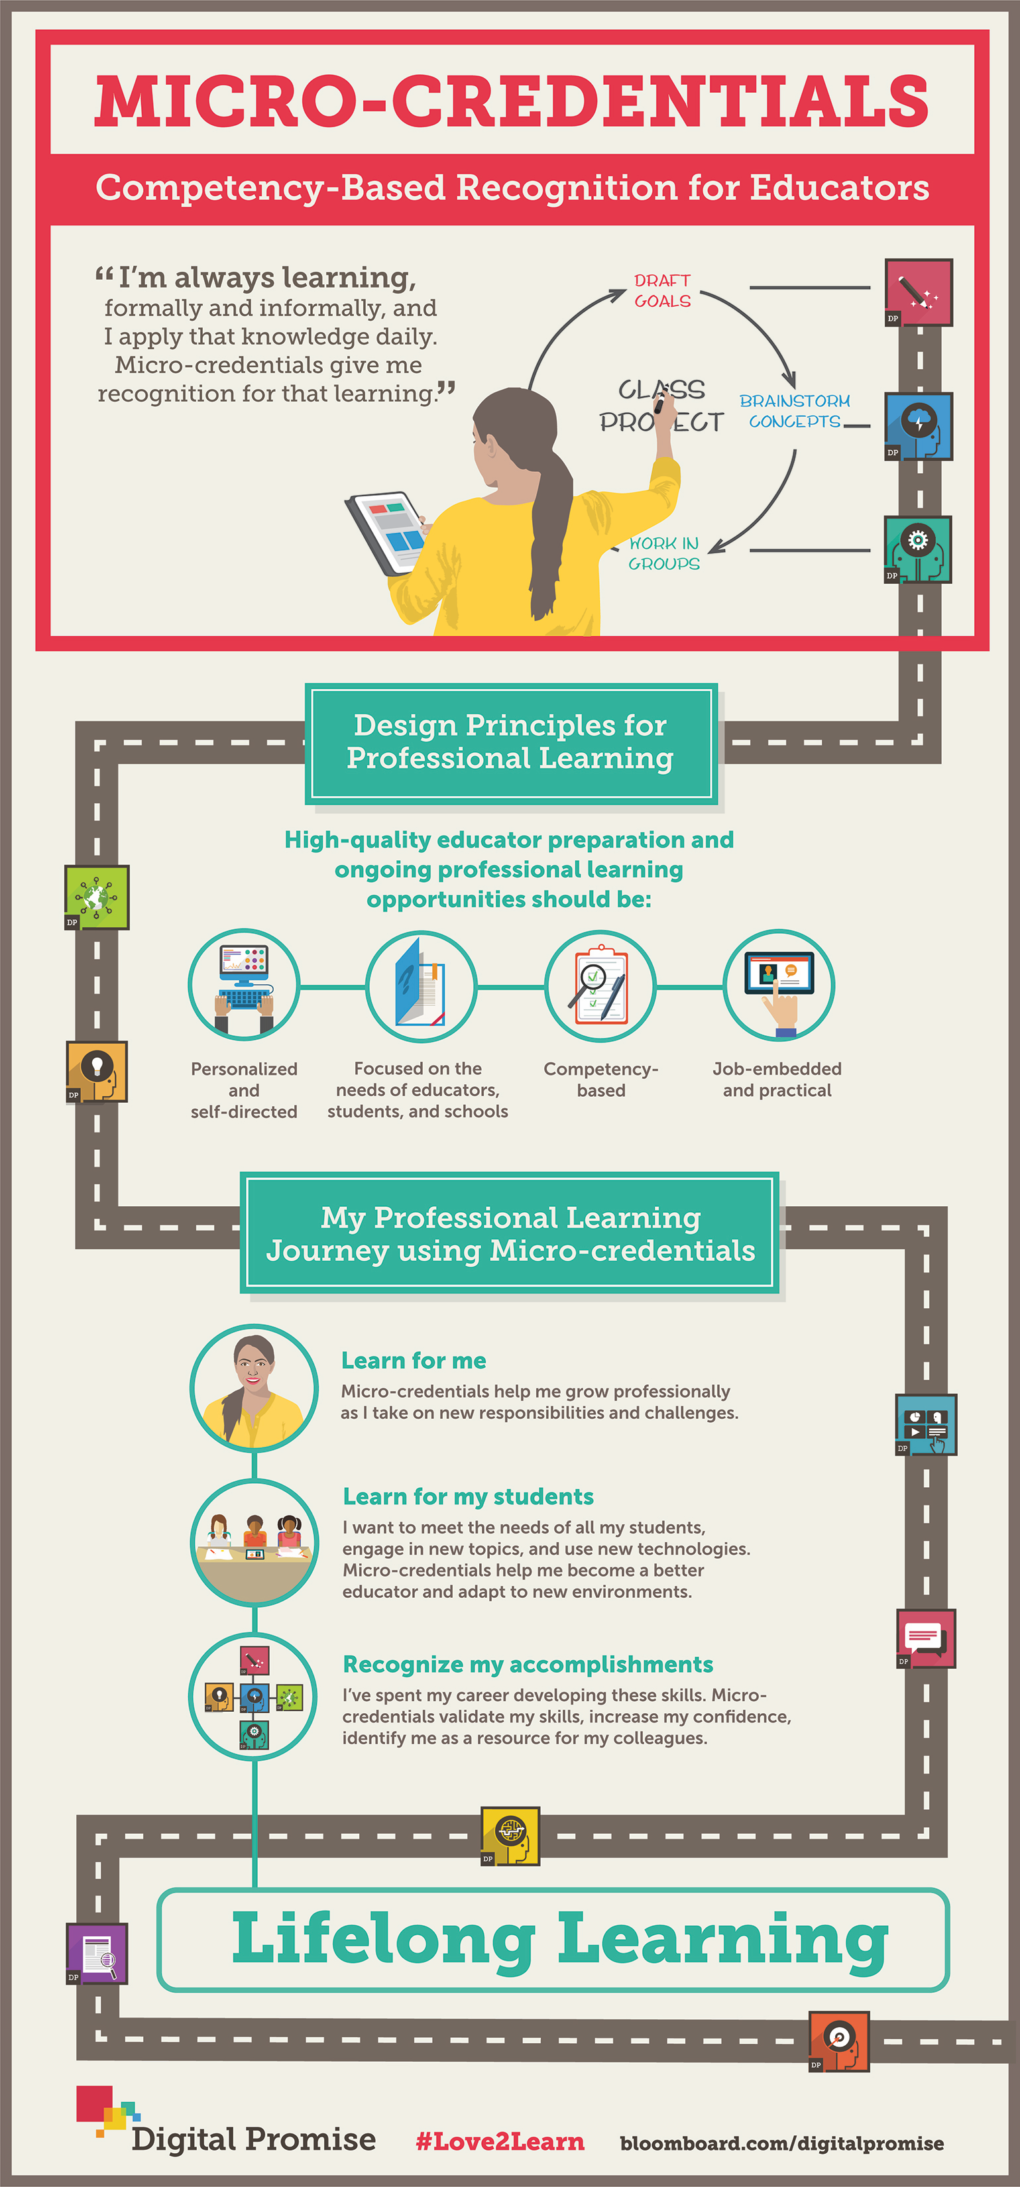 Digital Promise designers created an infographic to explain the benefits they see in micro-credentials.